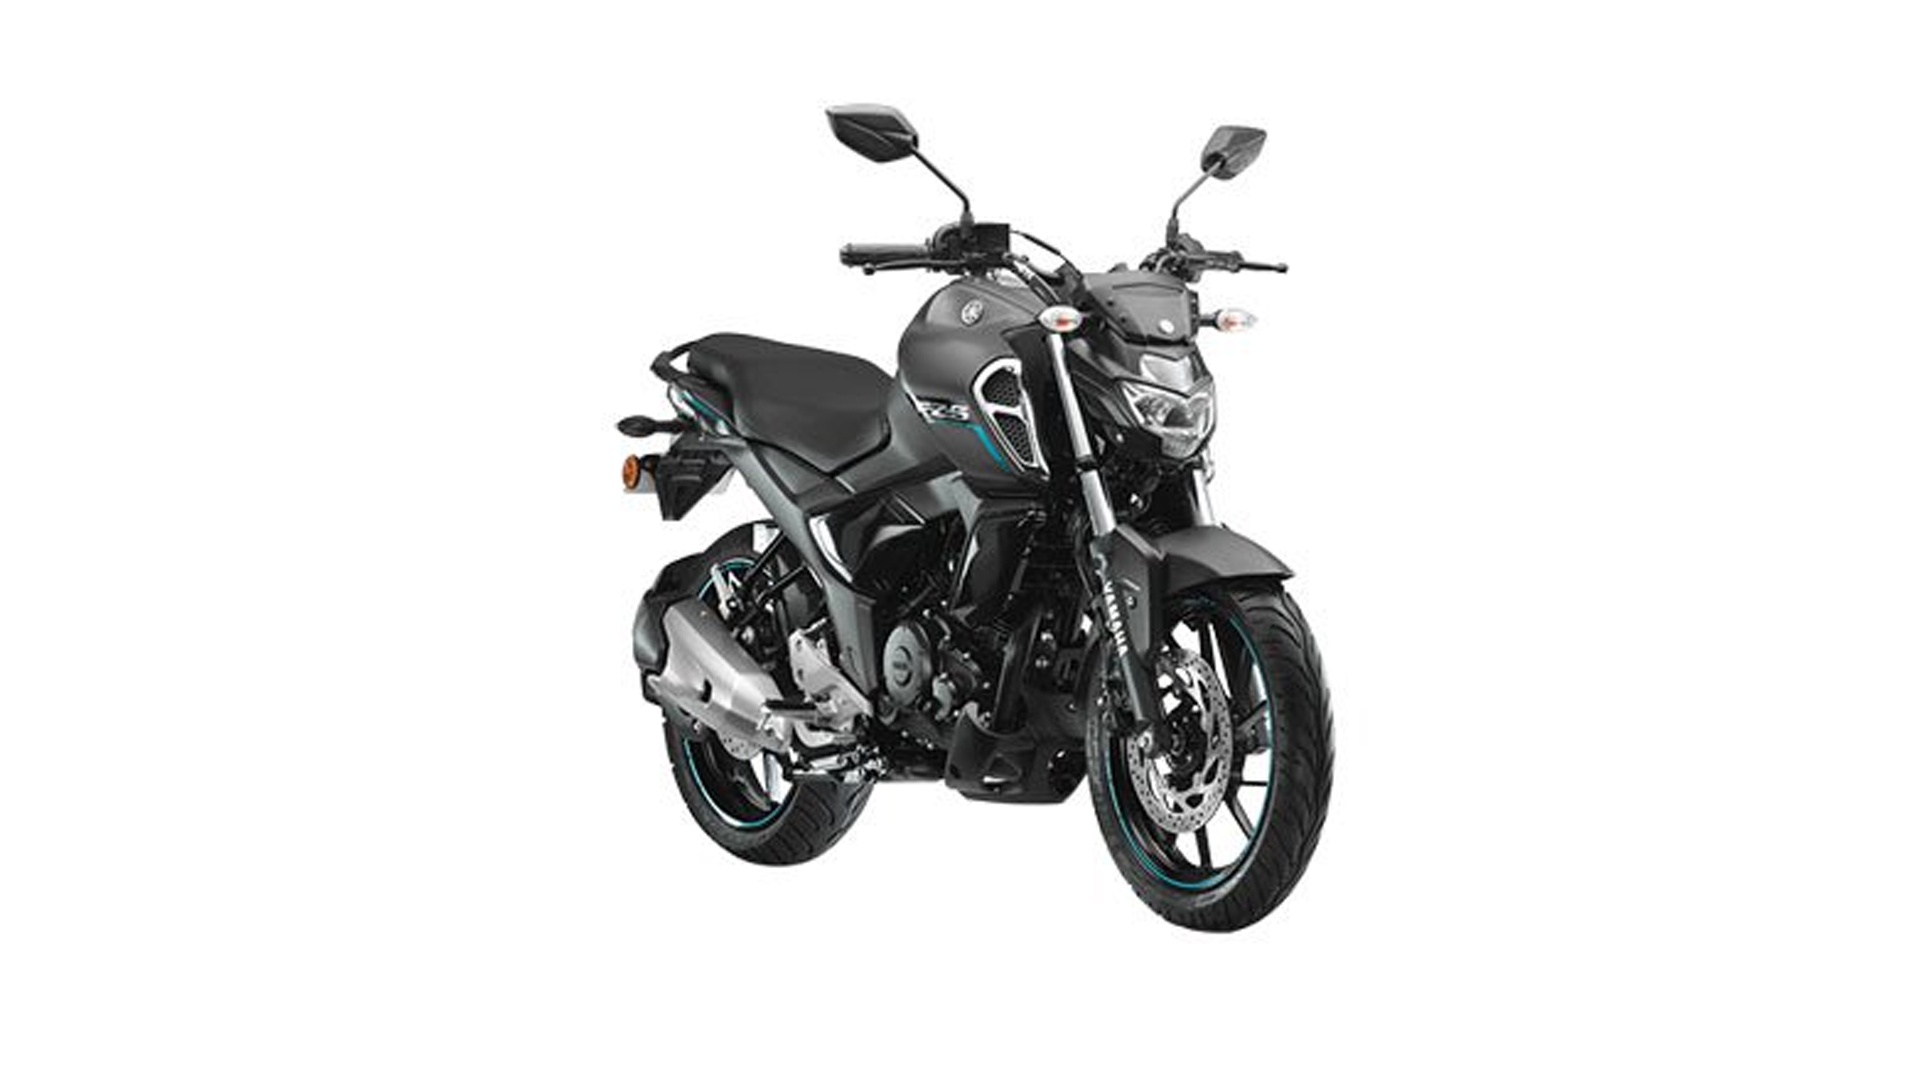 Yamaha Fzs 2020 Price Mileage Reviews Specification Gallery